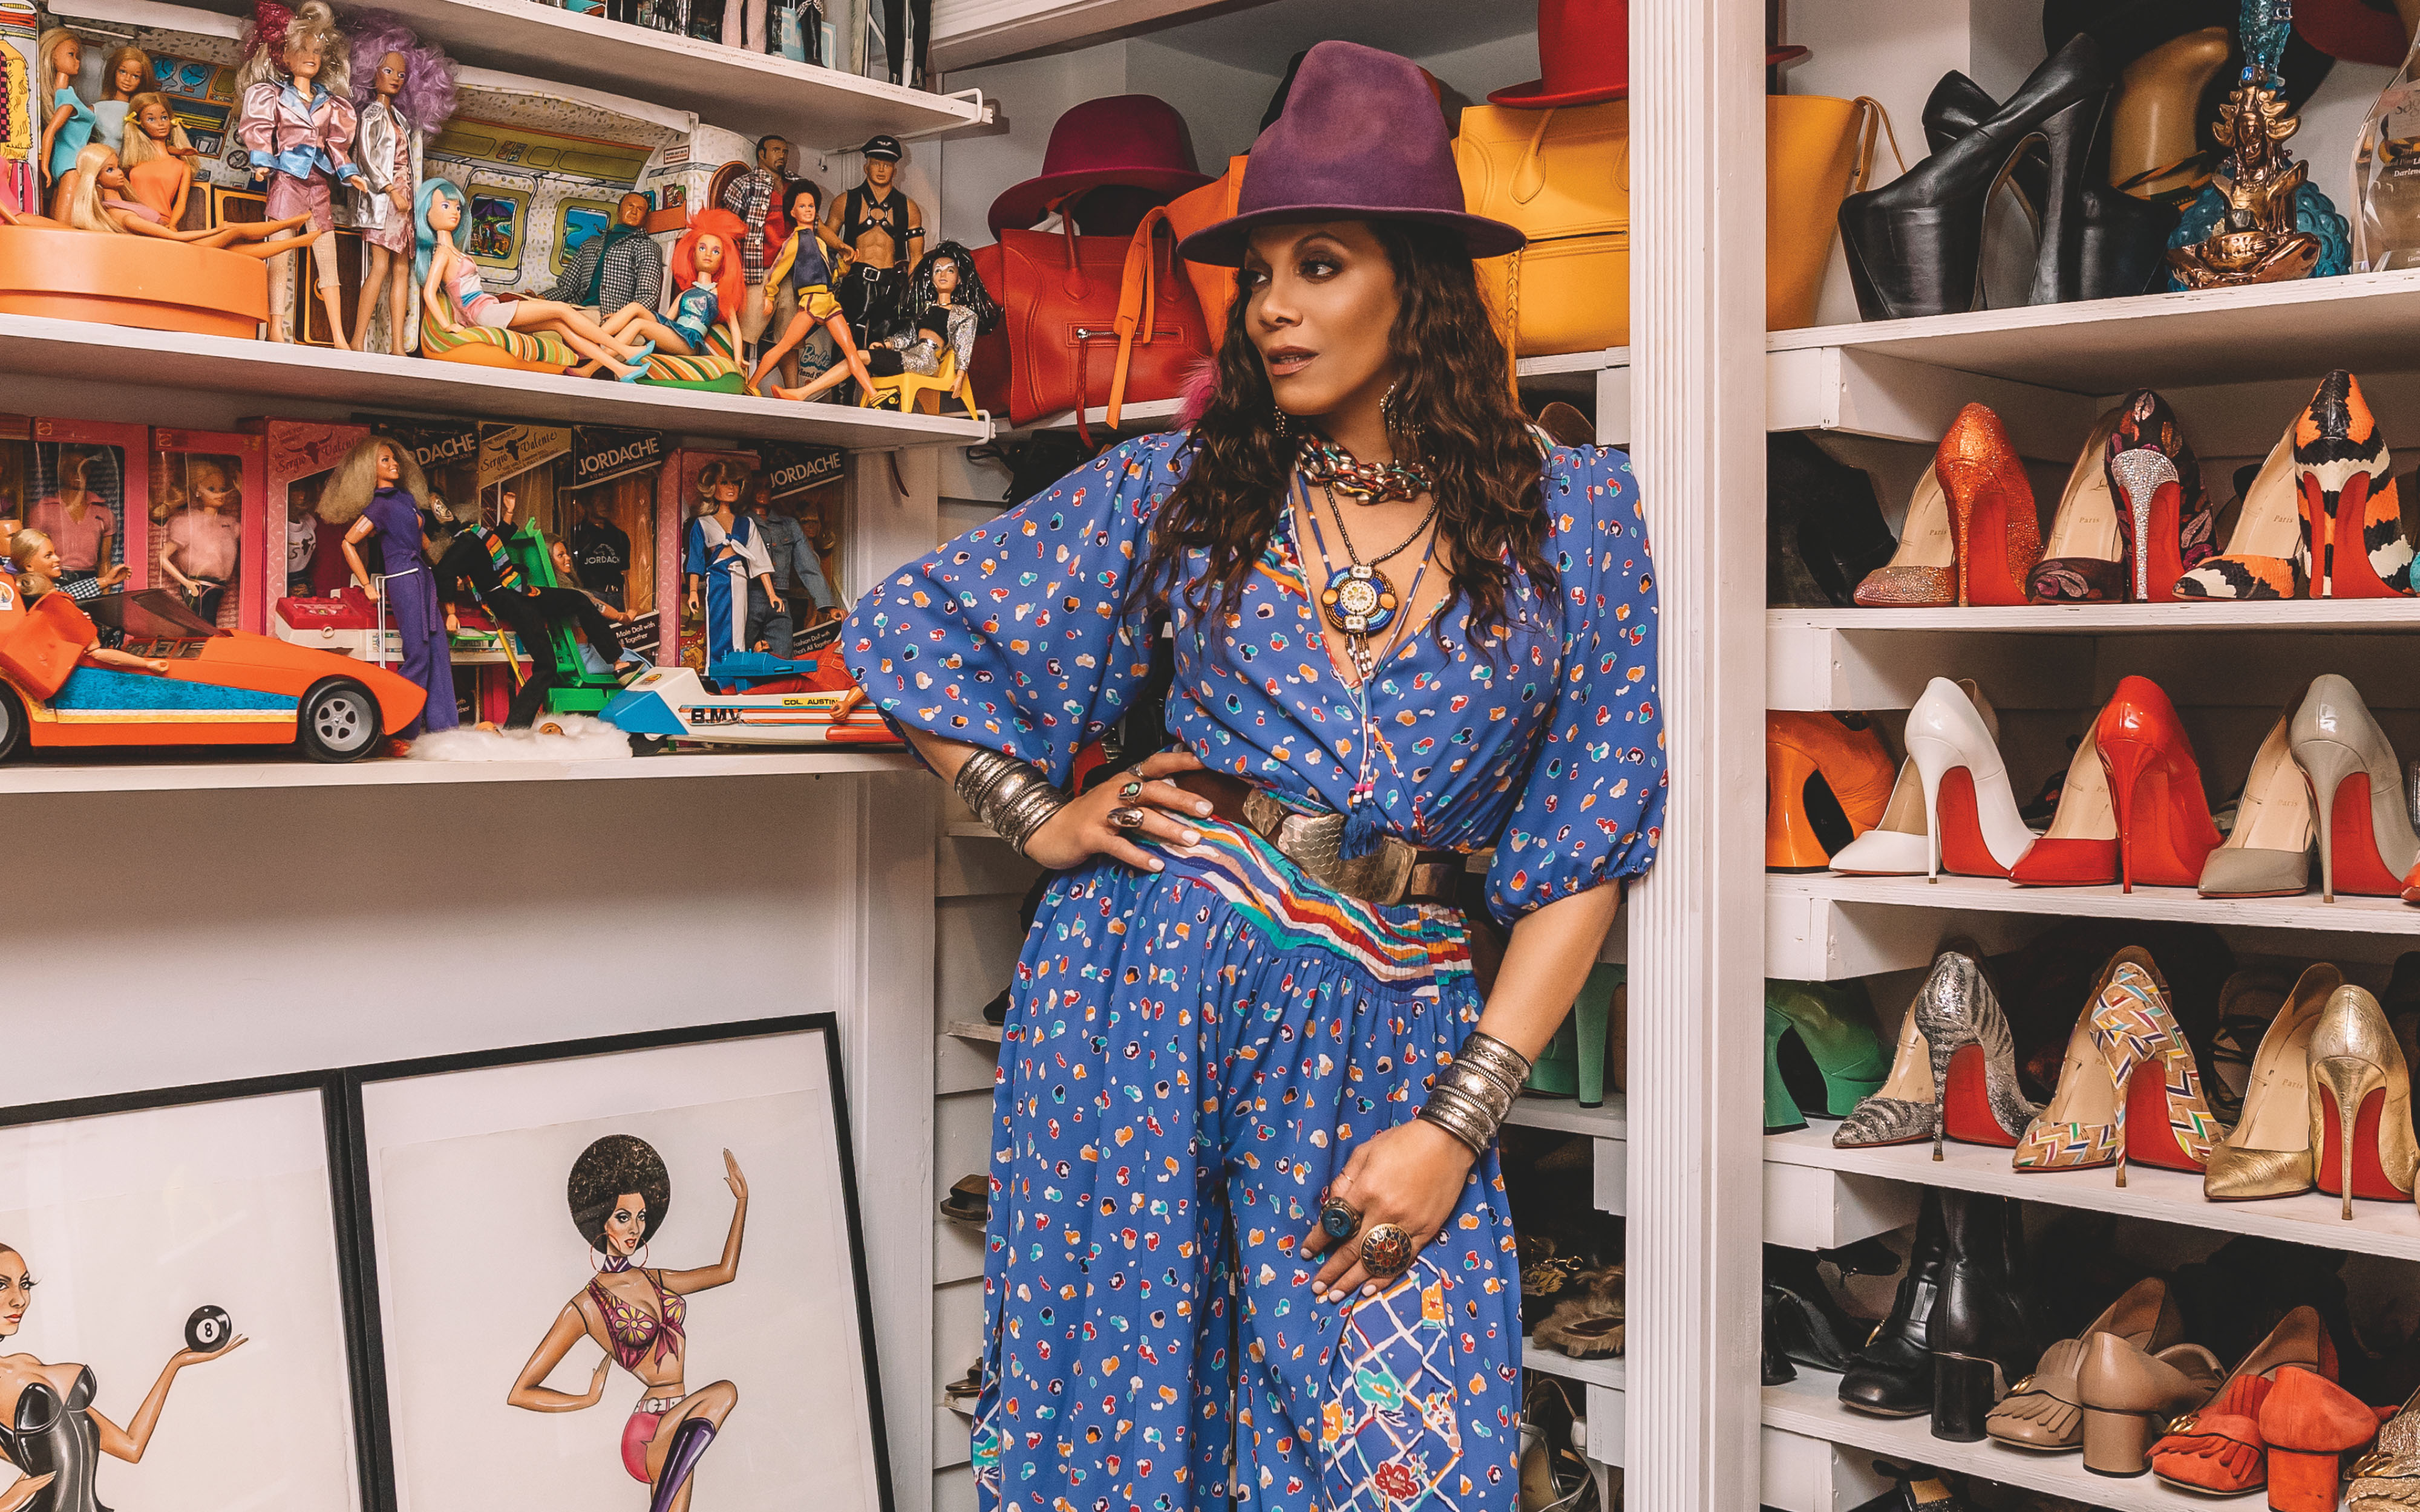 You Have To See Lina Bradford’s Shoe Collection To Believe It